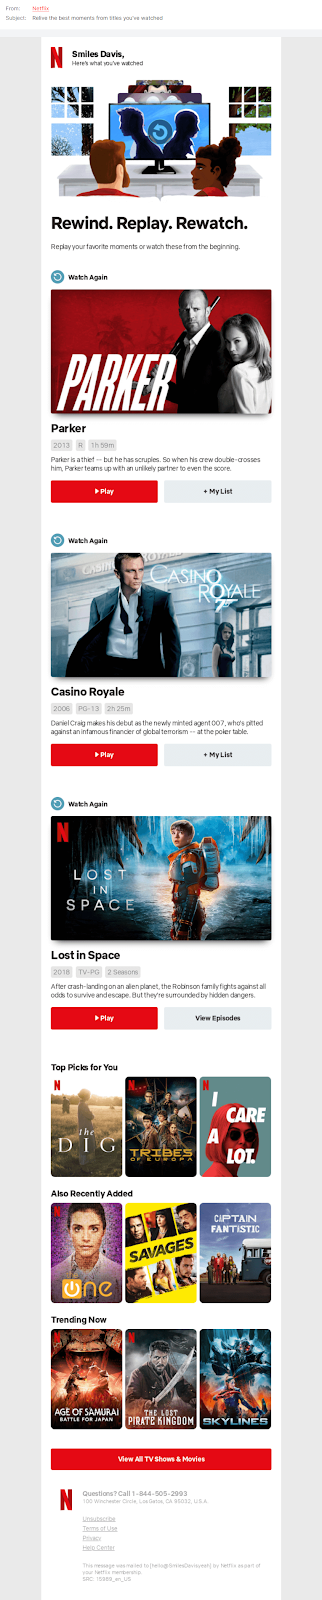 Netflix hyper-personalized email to a subscriber with watch history and show recommendations